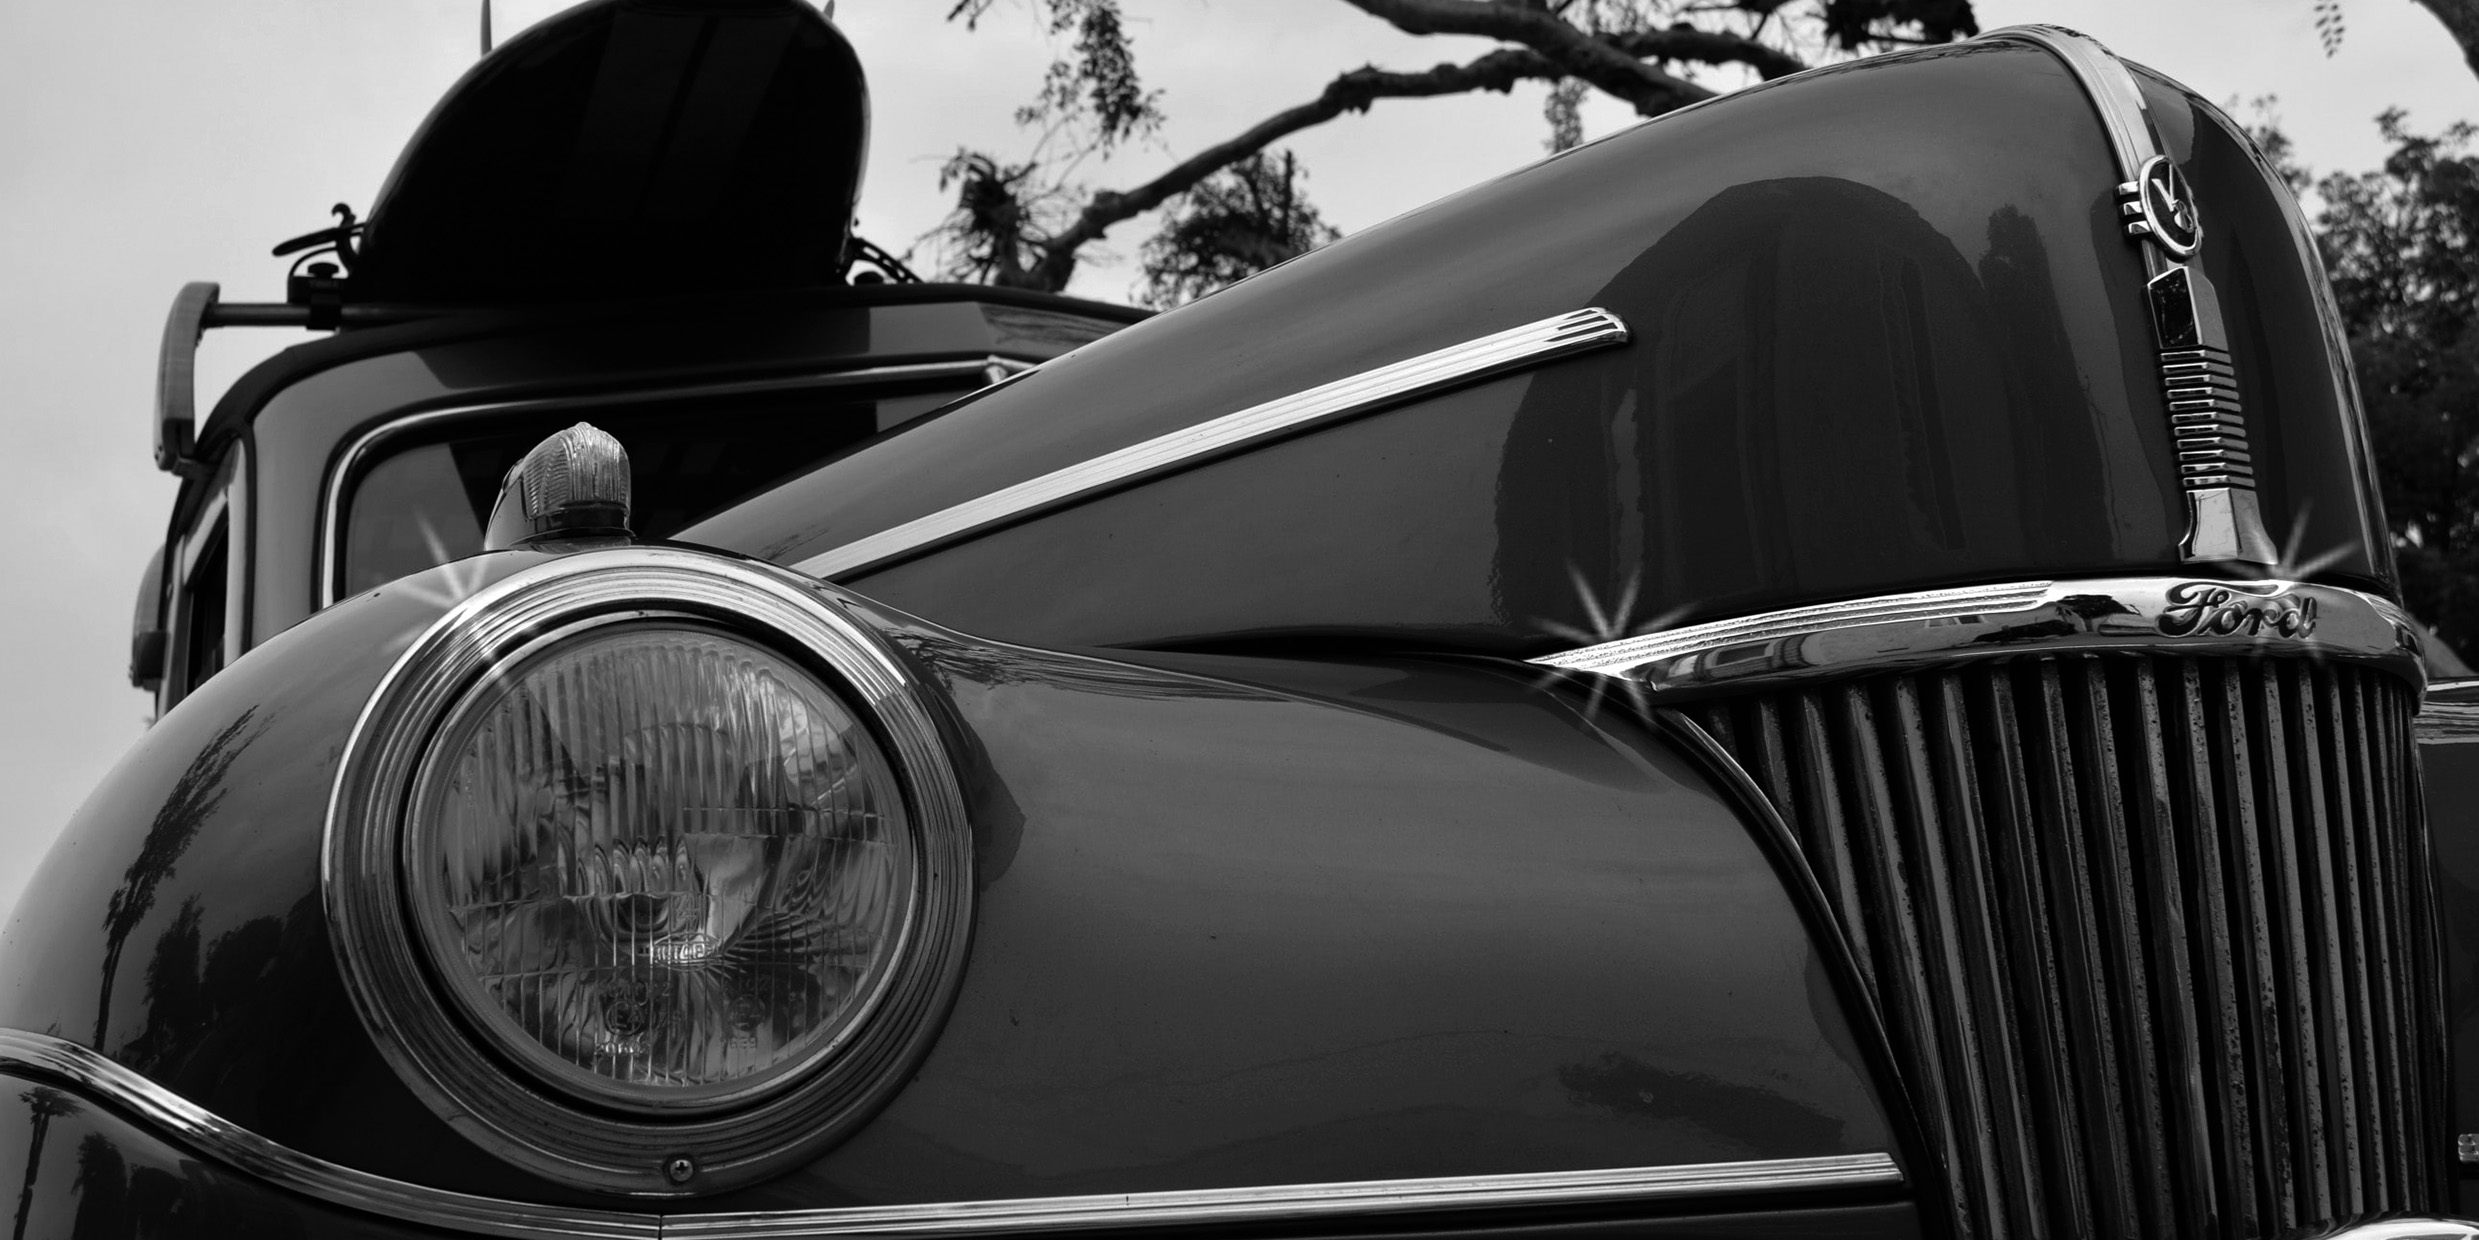 Black-and-white photo of classic car